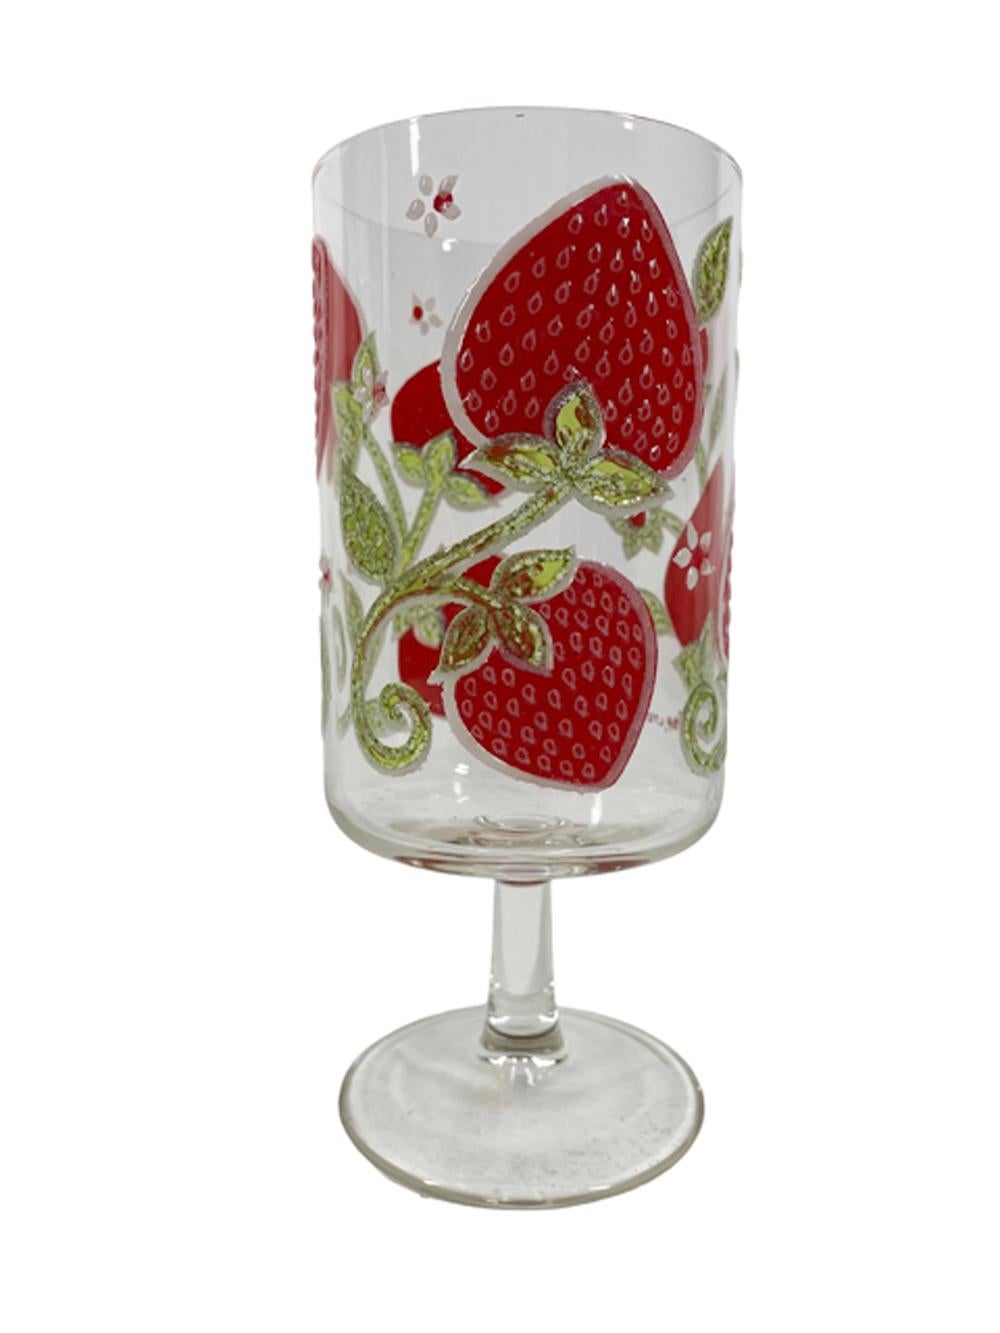 Six stemmed coolers by Culver, LTD decorated in translucent enamels with large red strawberries, green leaves, stems and vines all with white details. Signed Culver, LTD.